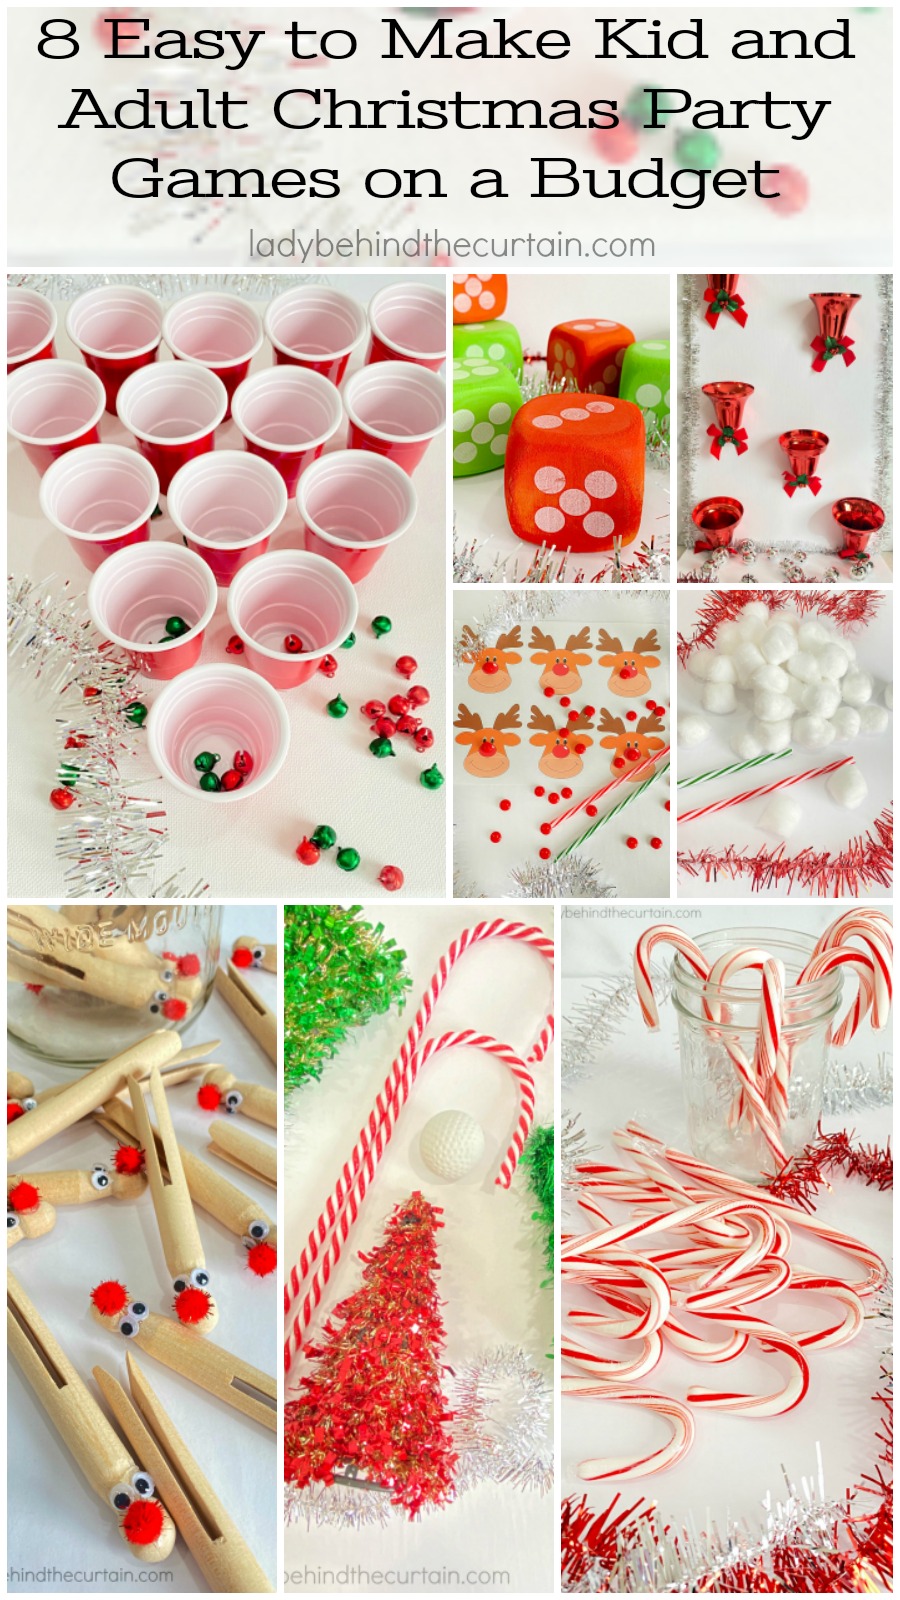 Fun Christmas Party Games For Adults - BEST GAMES WALKTHROUGH